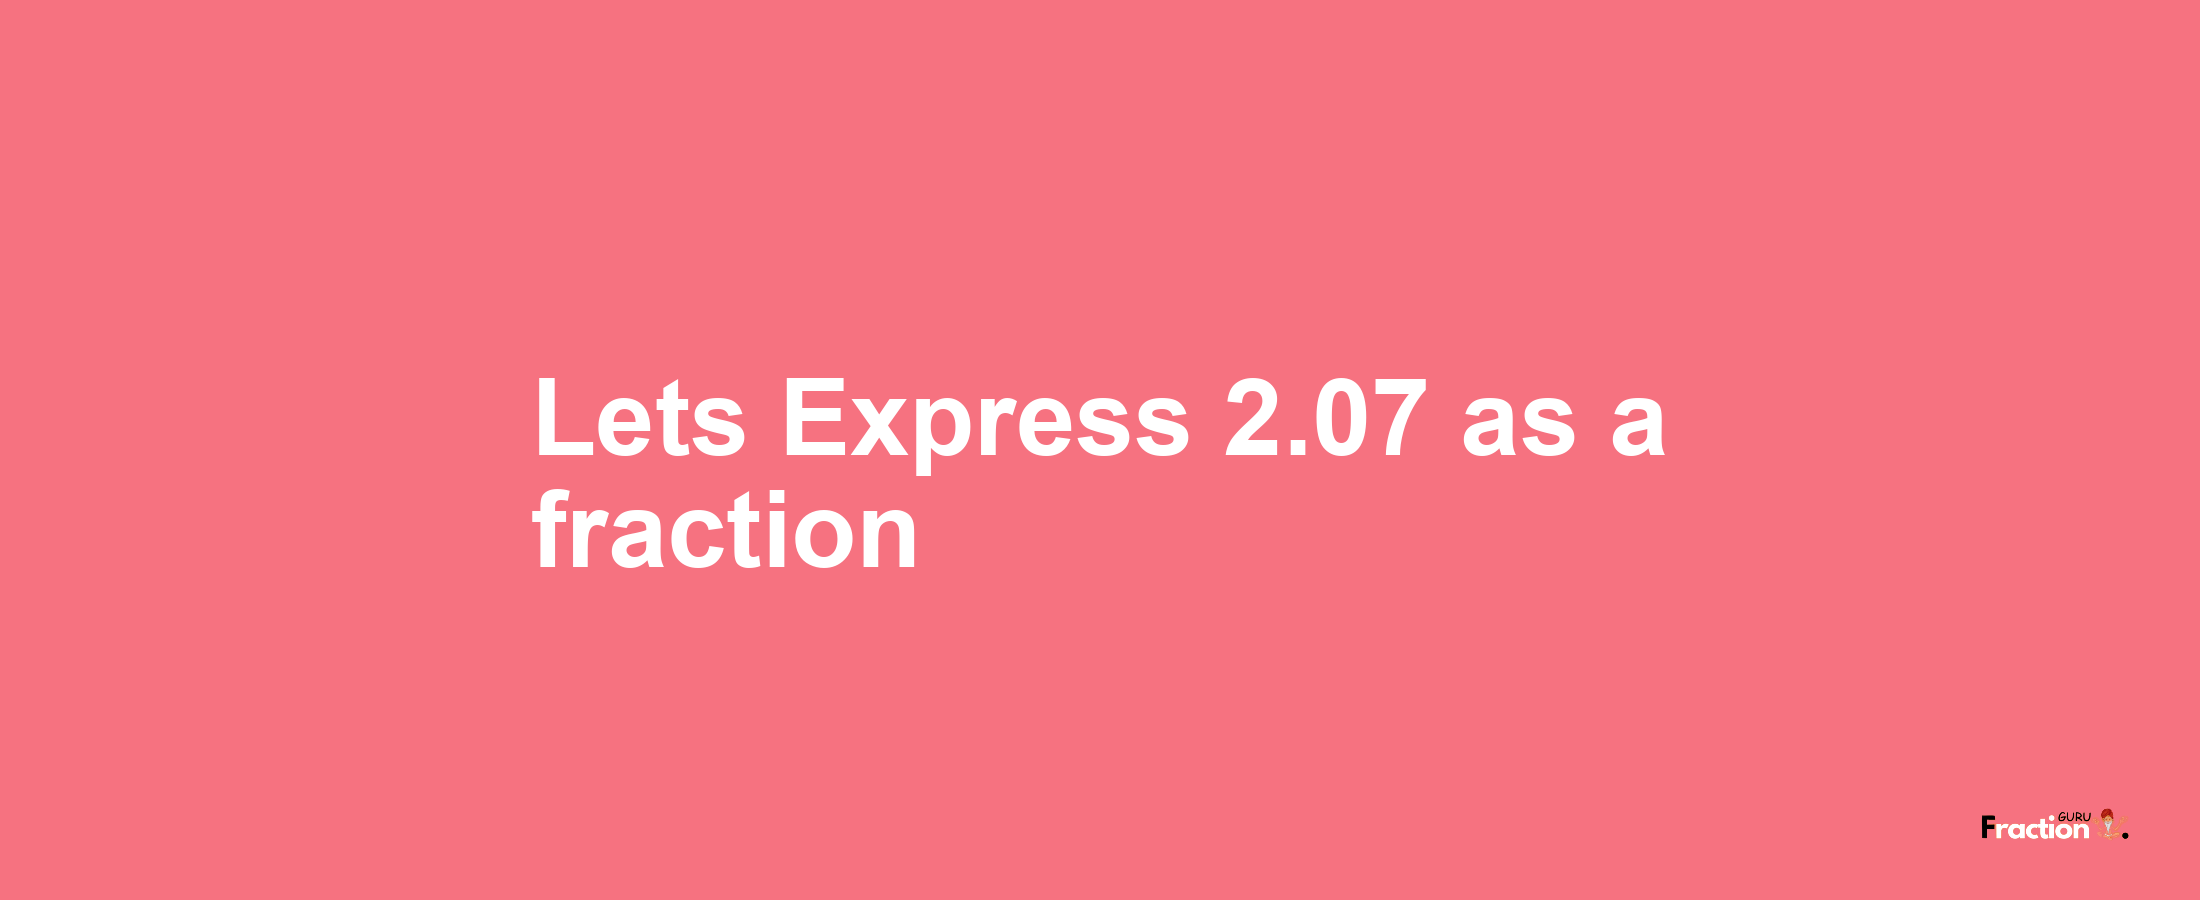 Lets Express 2.07 as afraction